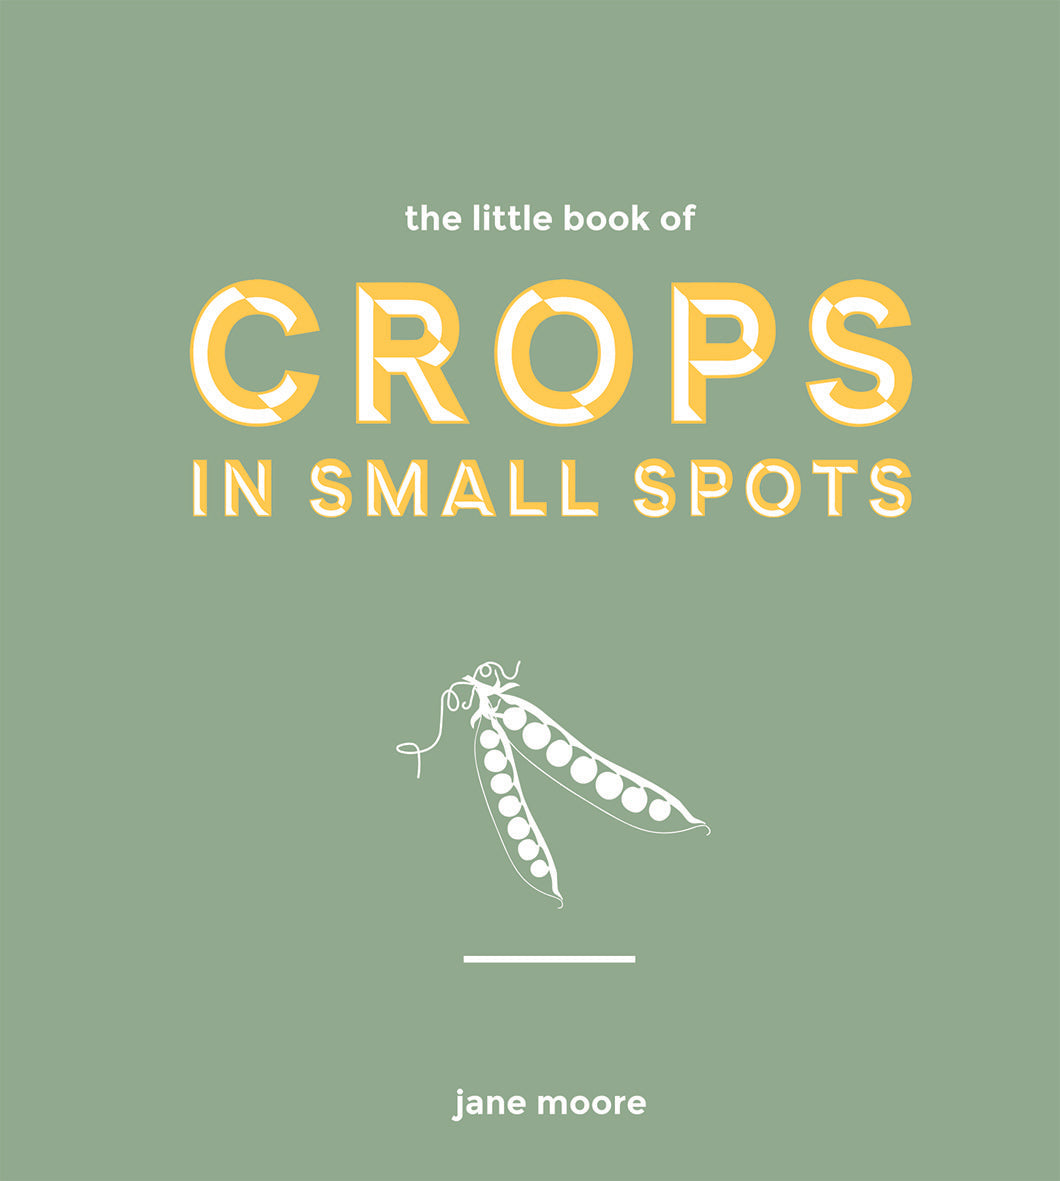 LITTLE BOOK OF CROPS IN SMALL SPOTS